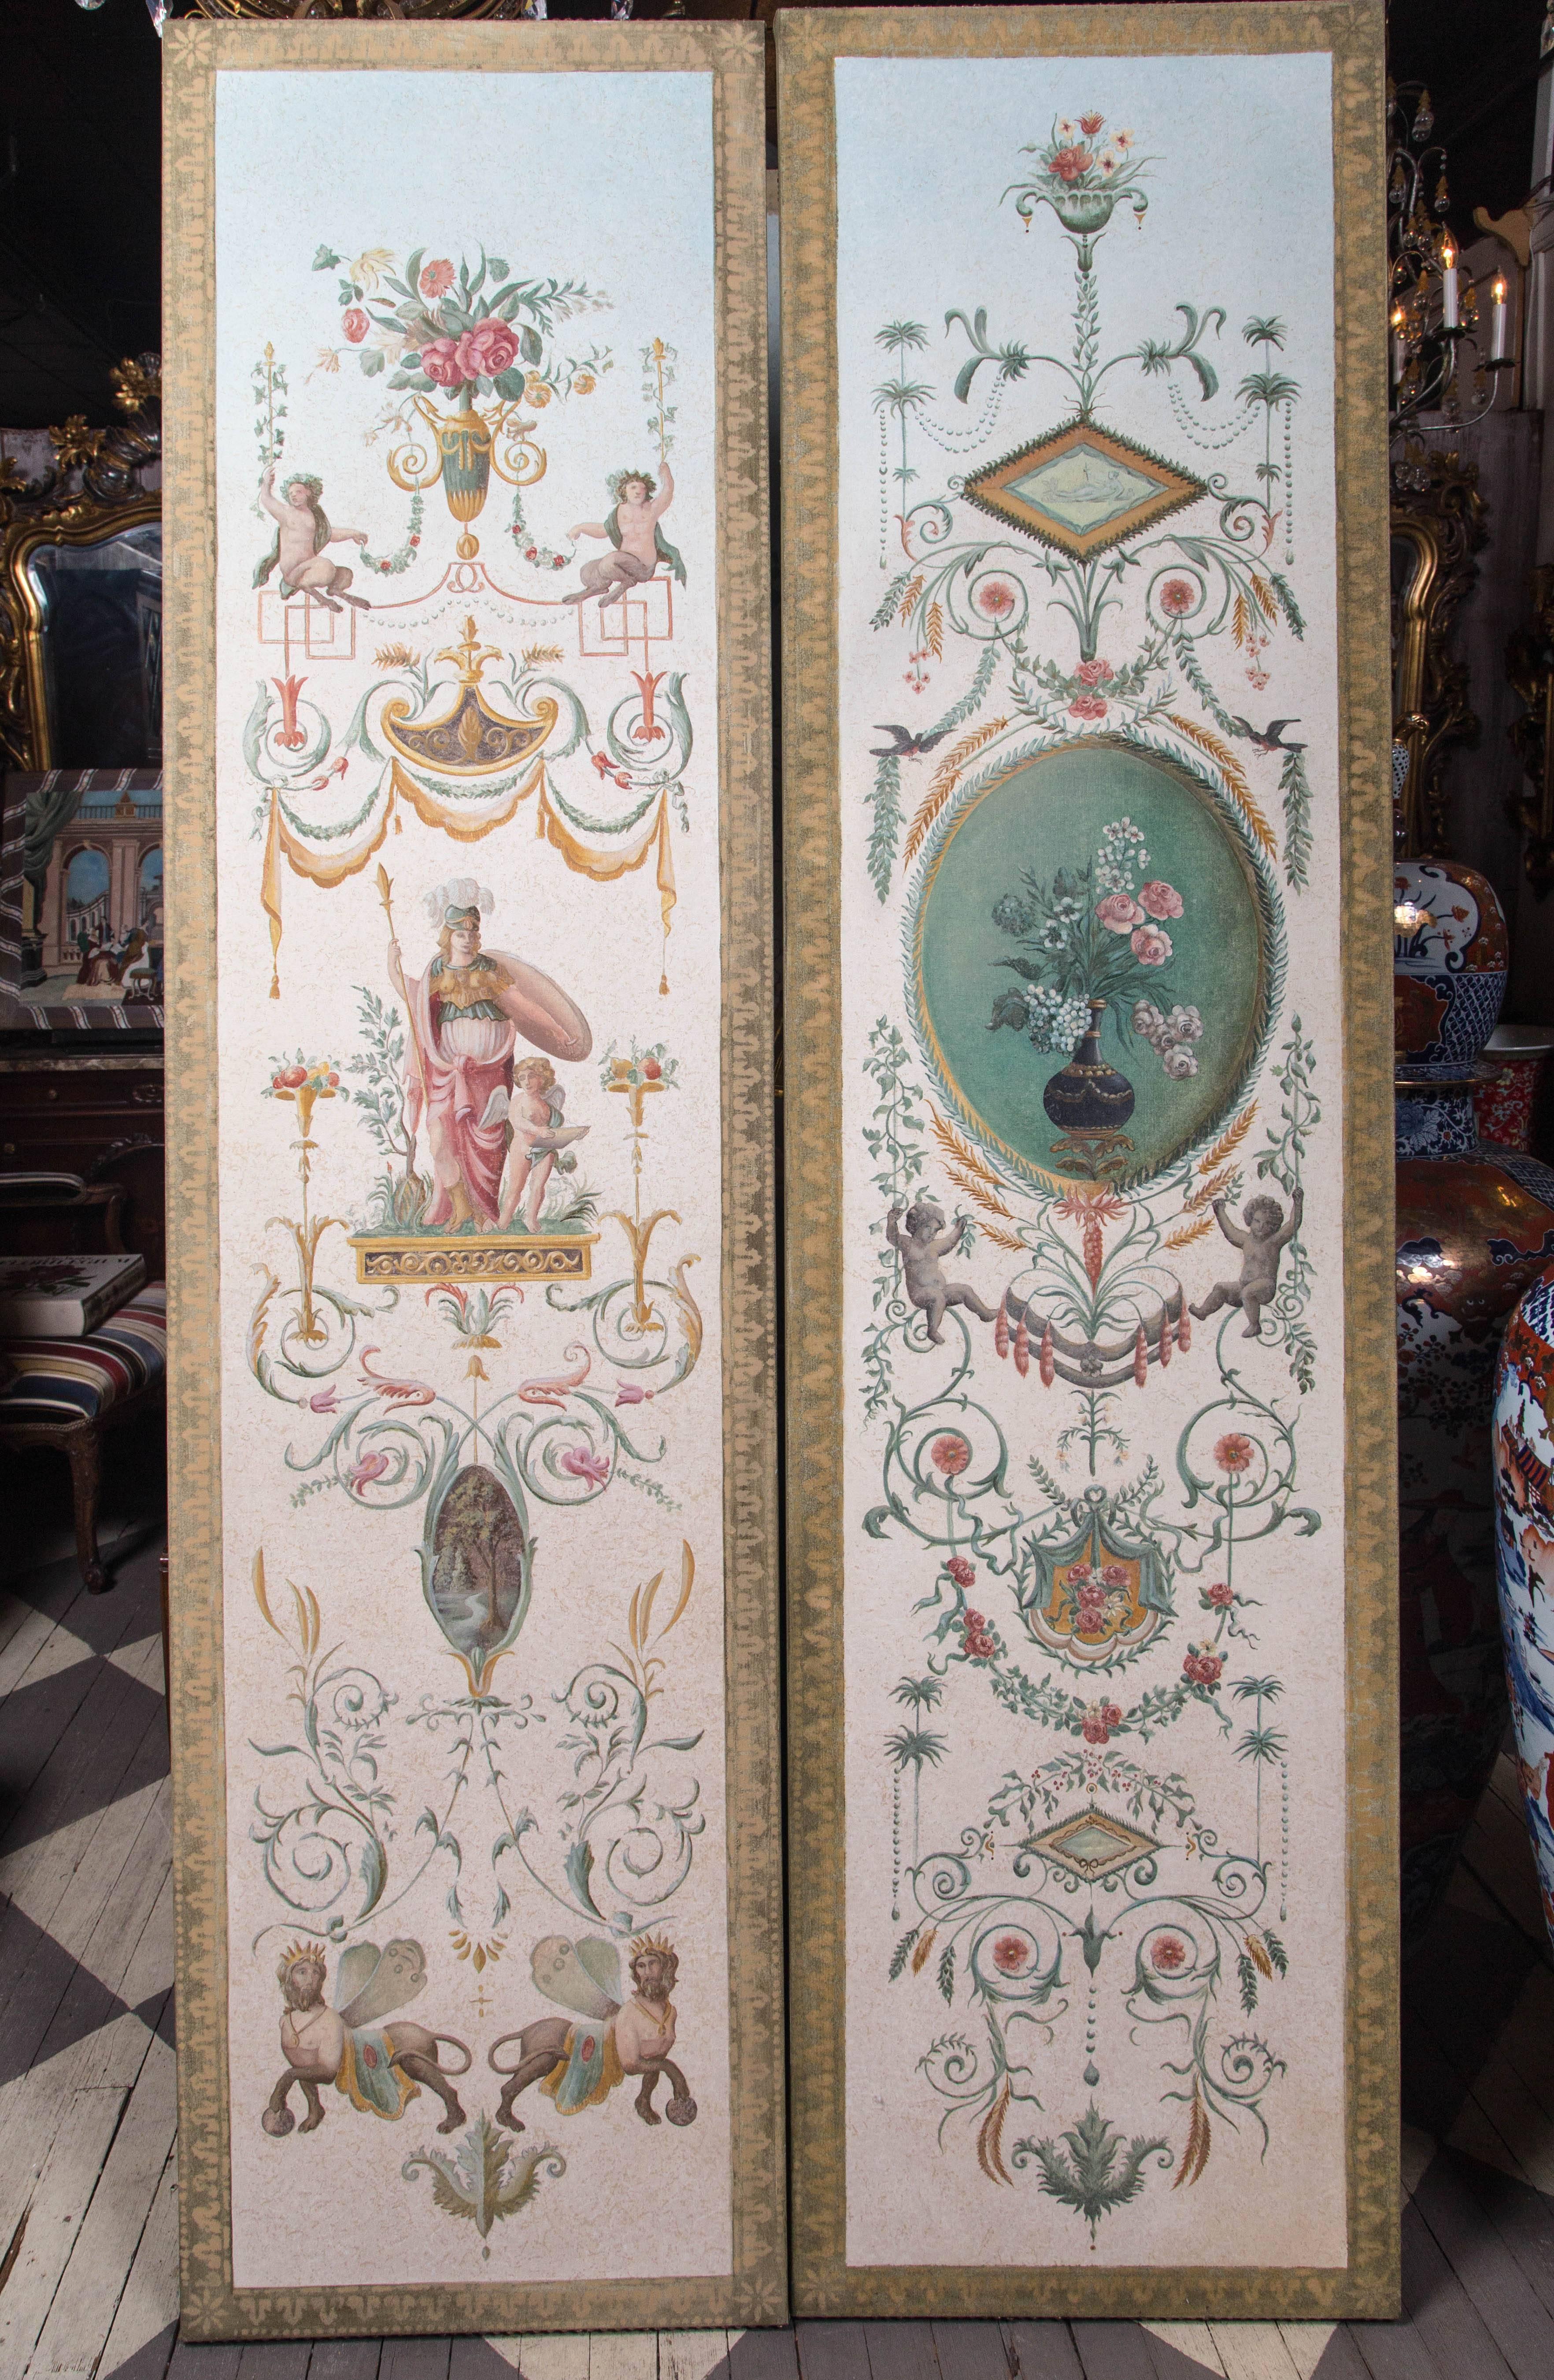 This screen is painted in the neoclassical style of ancient Rome. The designs seem to be taken from excavations at Pompeii and Herculeneum frescos.
The outer ends are secured with brass head hails. The back is of dark green velvet.
Each panel is